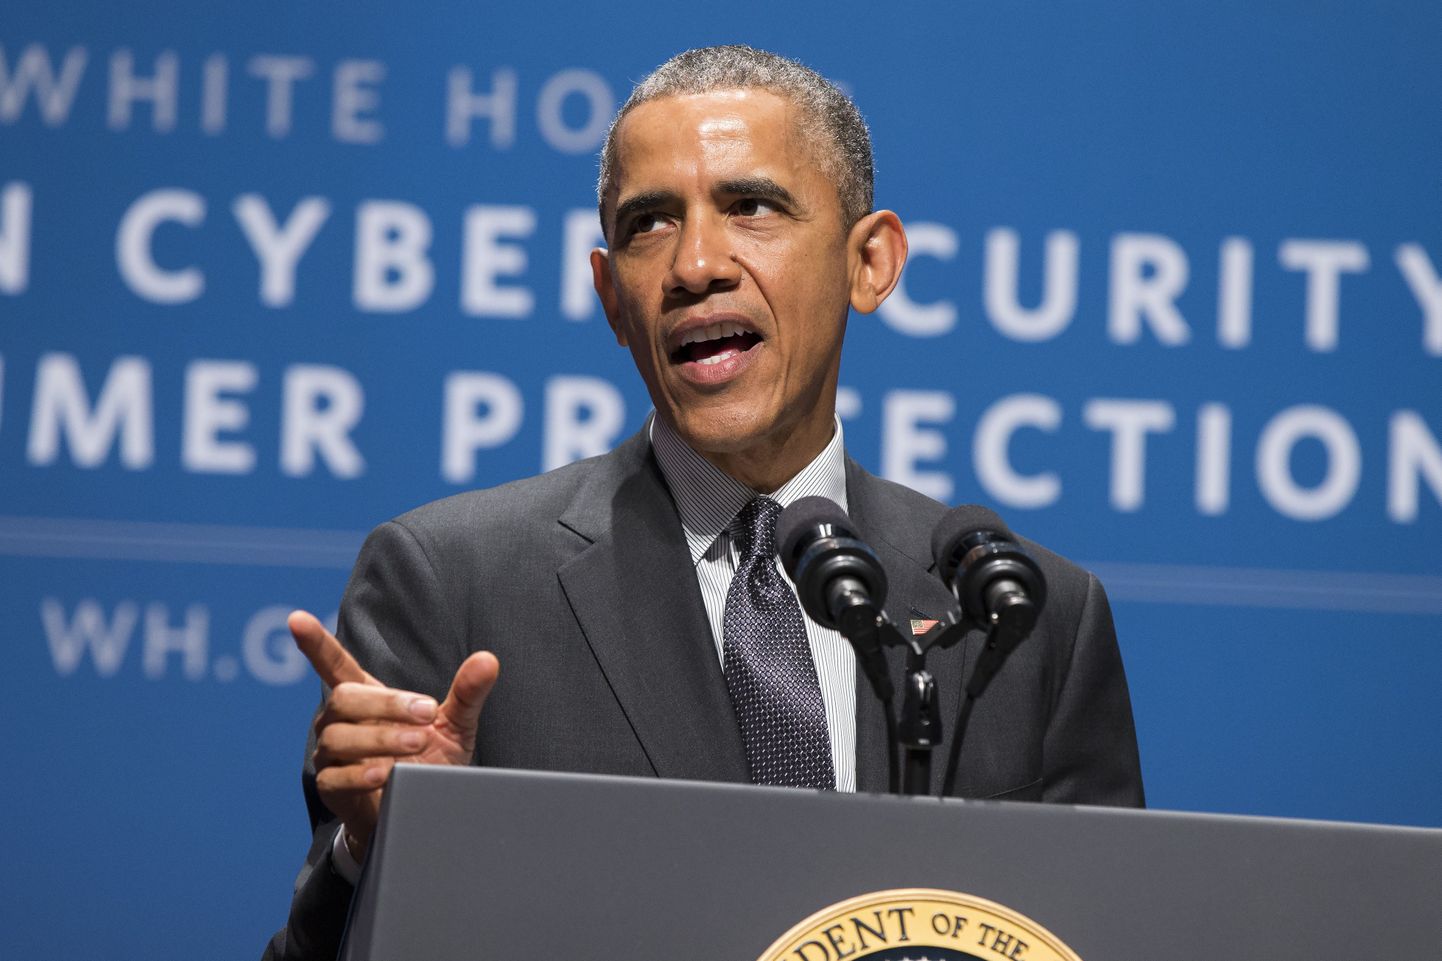 President Barack Obama speaks during a summit on cybersecurity and consumer protection, Friday, Feb. 13, 2015, at Stanford University in Palo Alto, Calif. The president said cyberspace is the new "wild West" _ with daily attempted hacks and people looking to the government to be the sheriff. He's asking the private sector to do more to help.  (AP Photo/Evan Vucci)